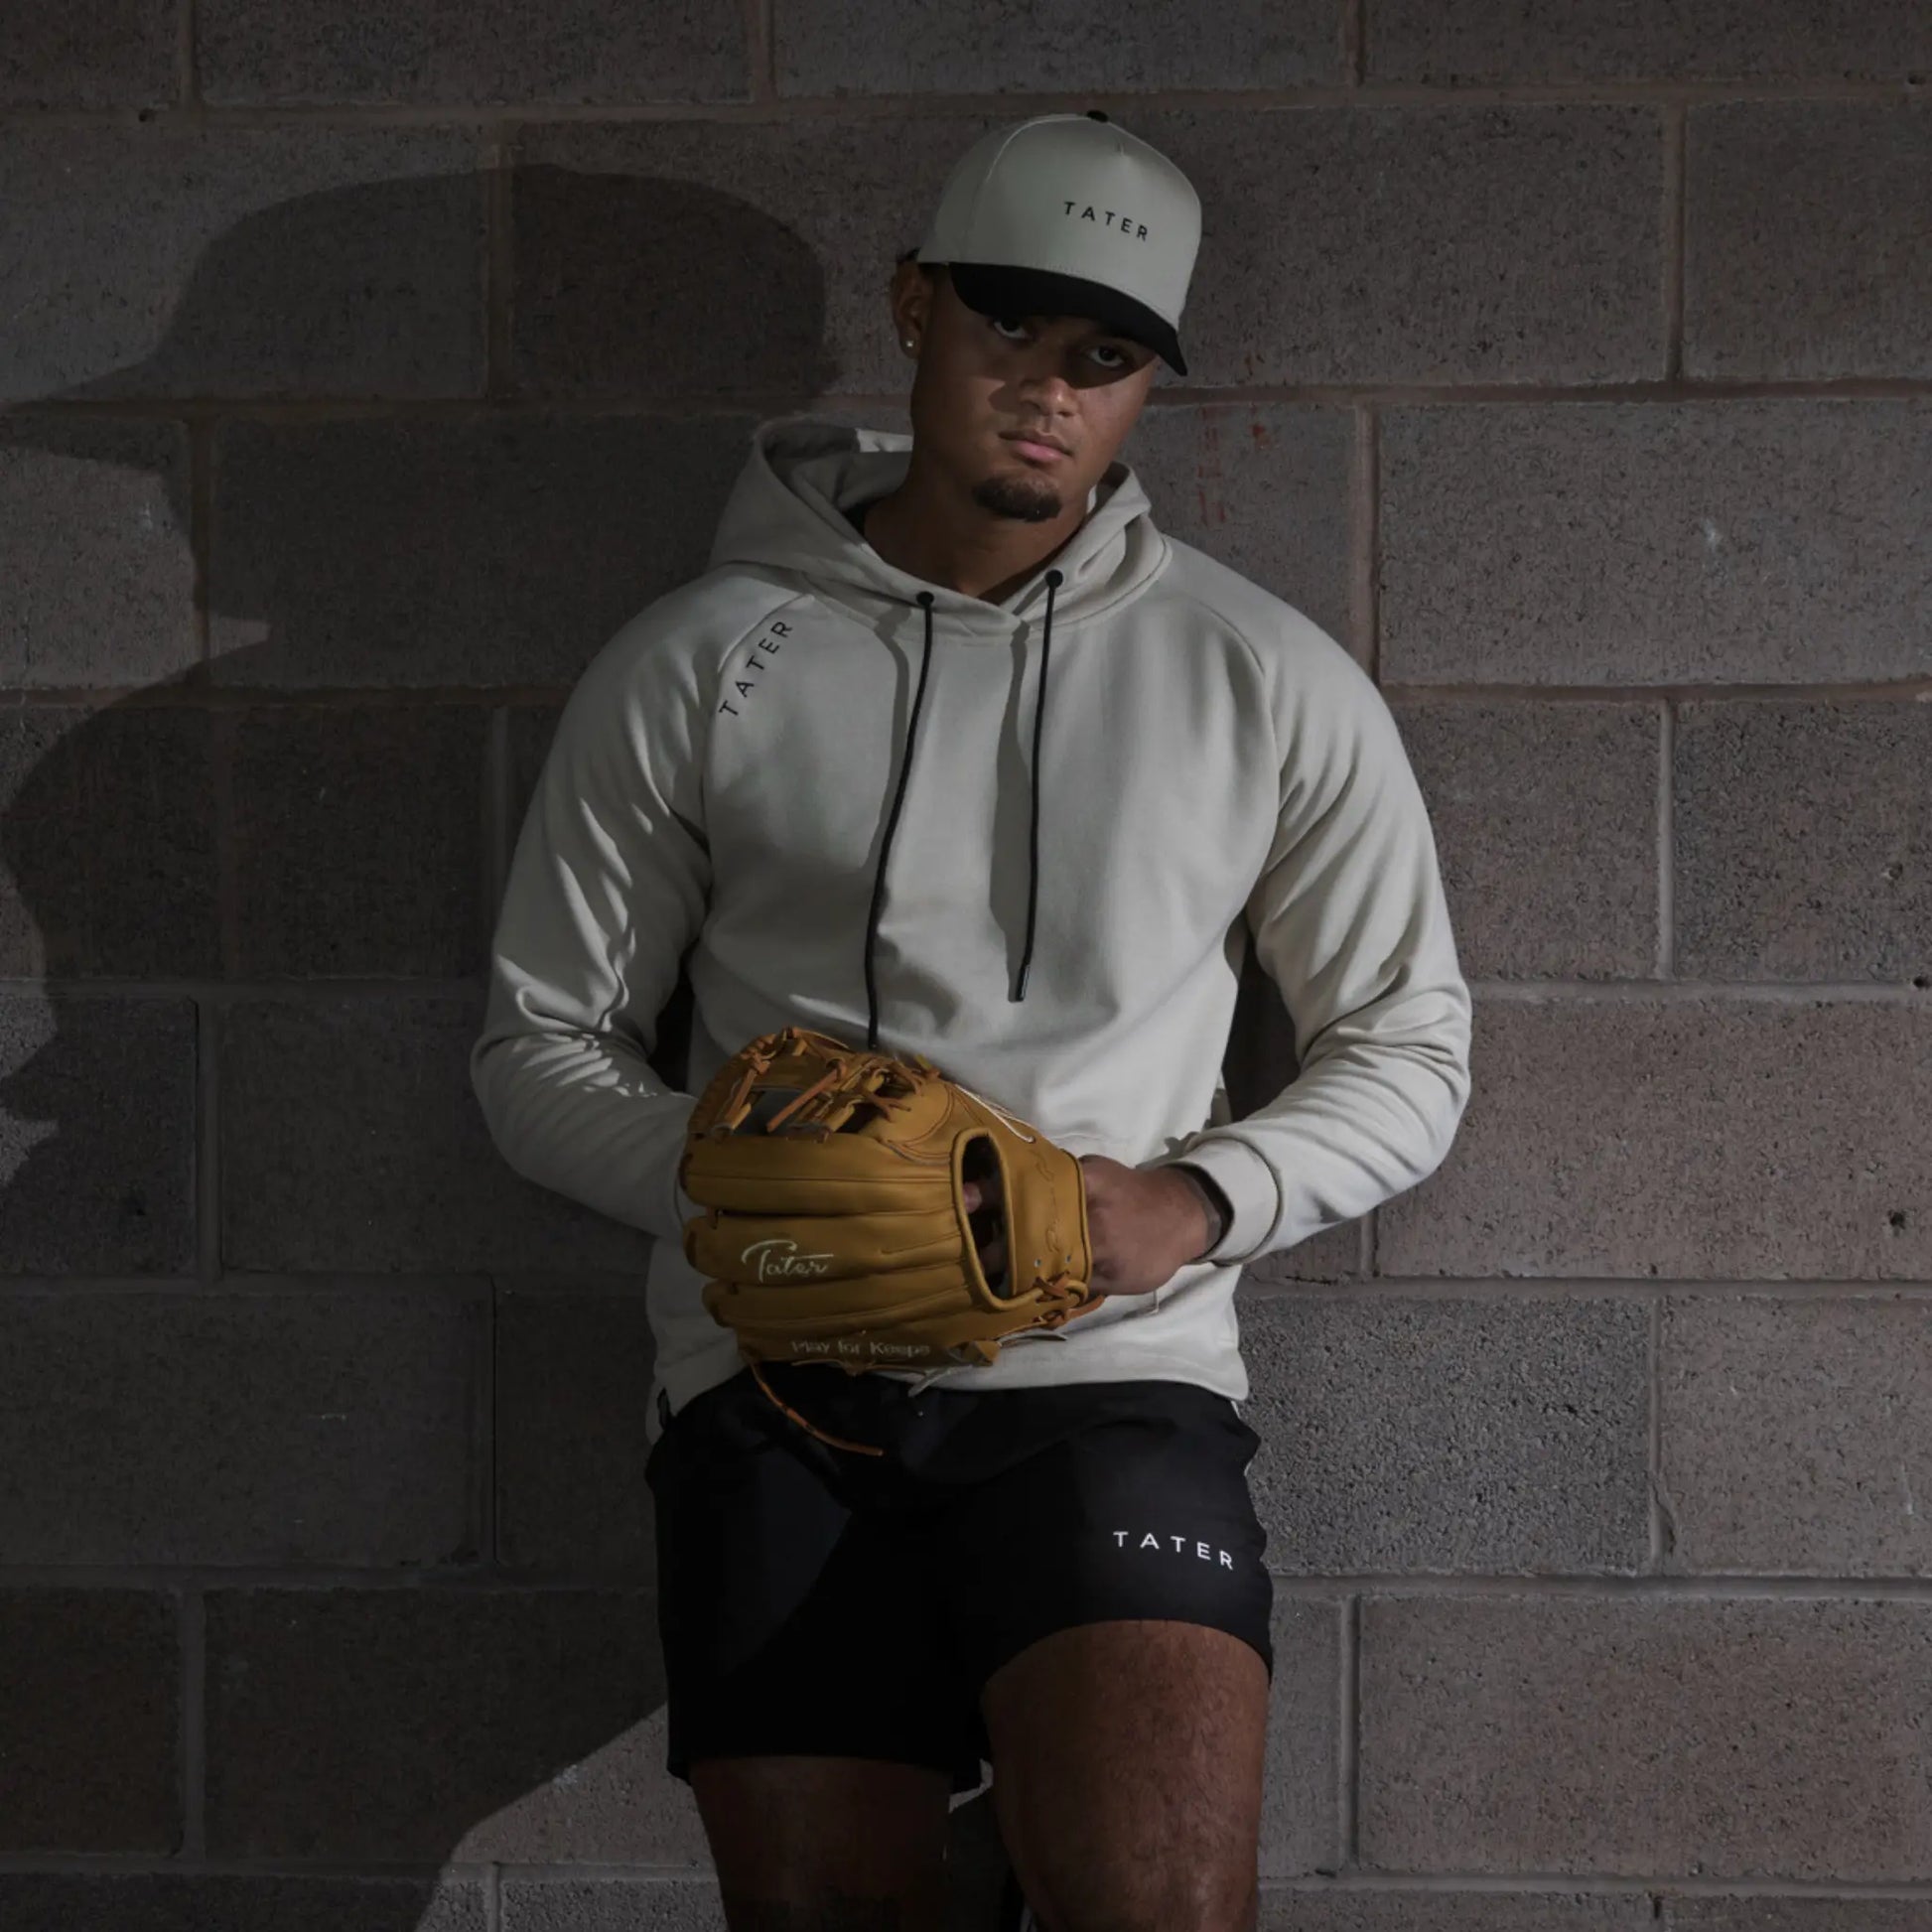 The image showcases an individual donning a coordinated sports ensemble from Tater Baseball. The person is wearing a cream snapback hat with the brand's name and logo, complemented by a matching hoodie. In one hand, they hold a gold-colored baseball glove, and they're dressed in black athletic shorts bearing the brand's name. The overall styling presents a sleek, athletic look, with a backdrop that adds a raw, urban feel to the image, highlighting the sporty yet stylish nature of the apparel. 